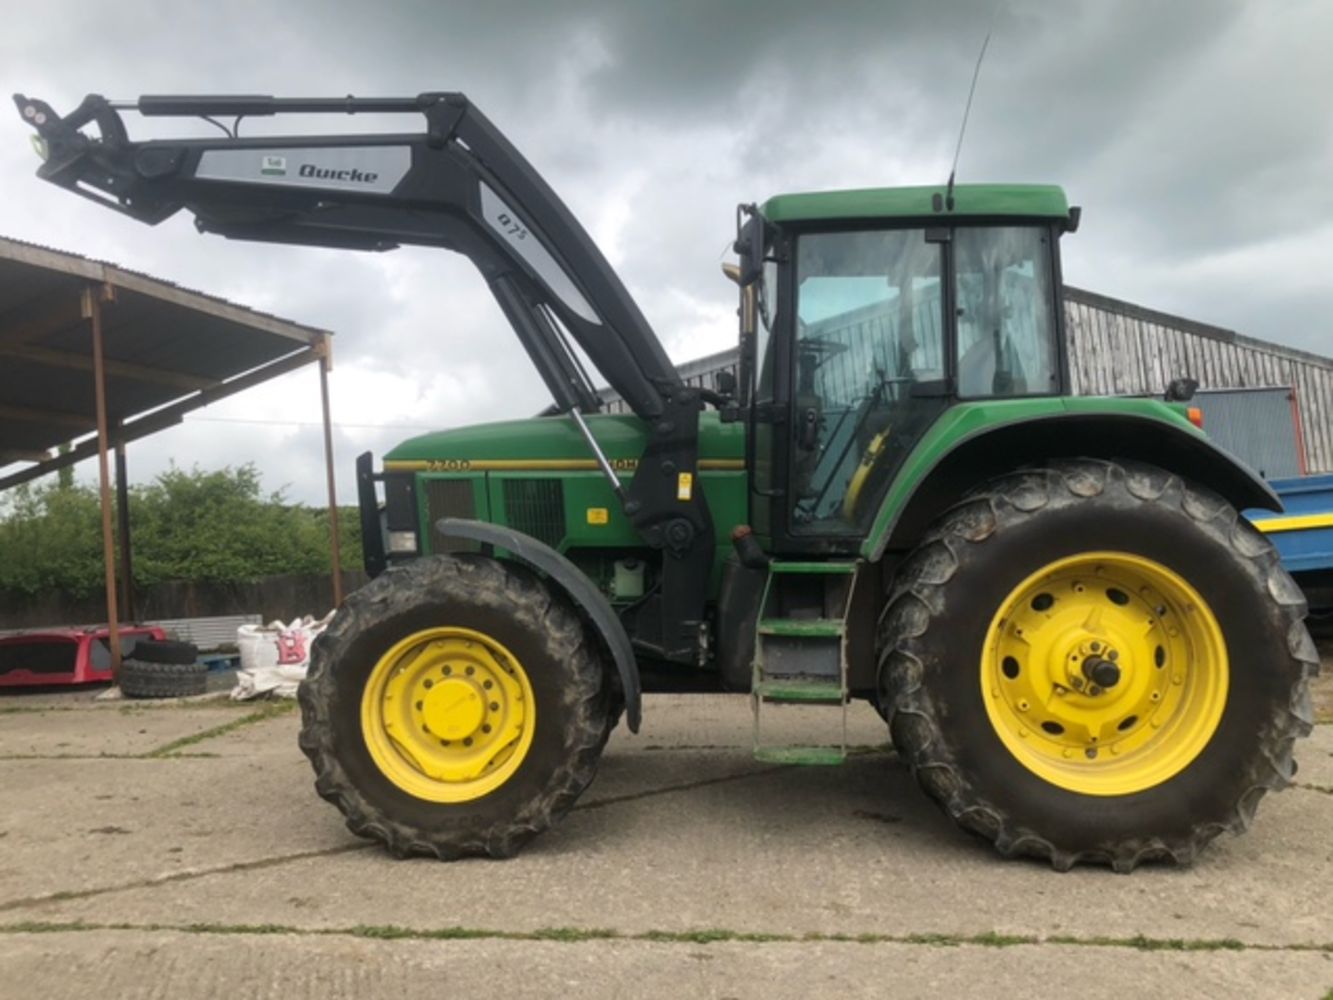 JULY COLLECTIVE MACHINERY, PLANT, FODDER & VEHICLE SALE -